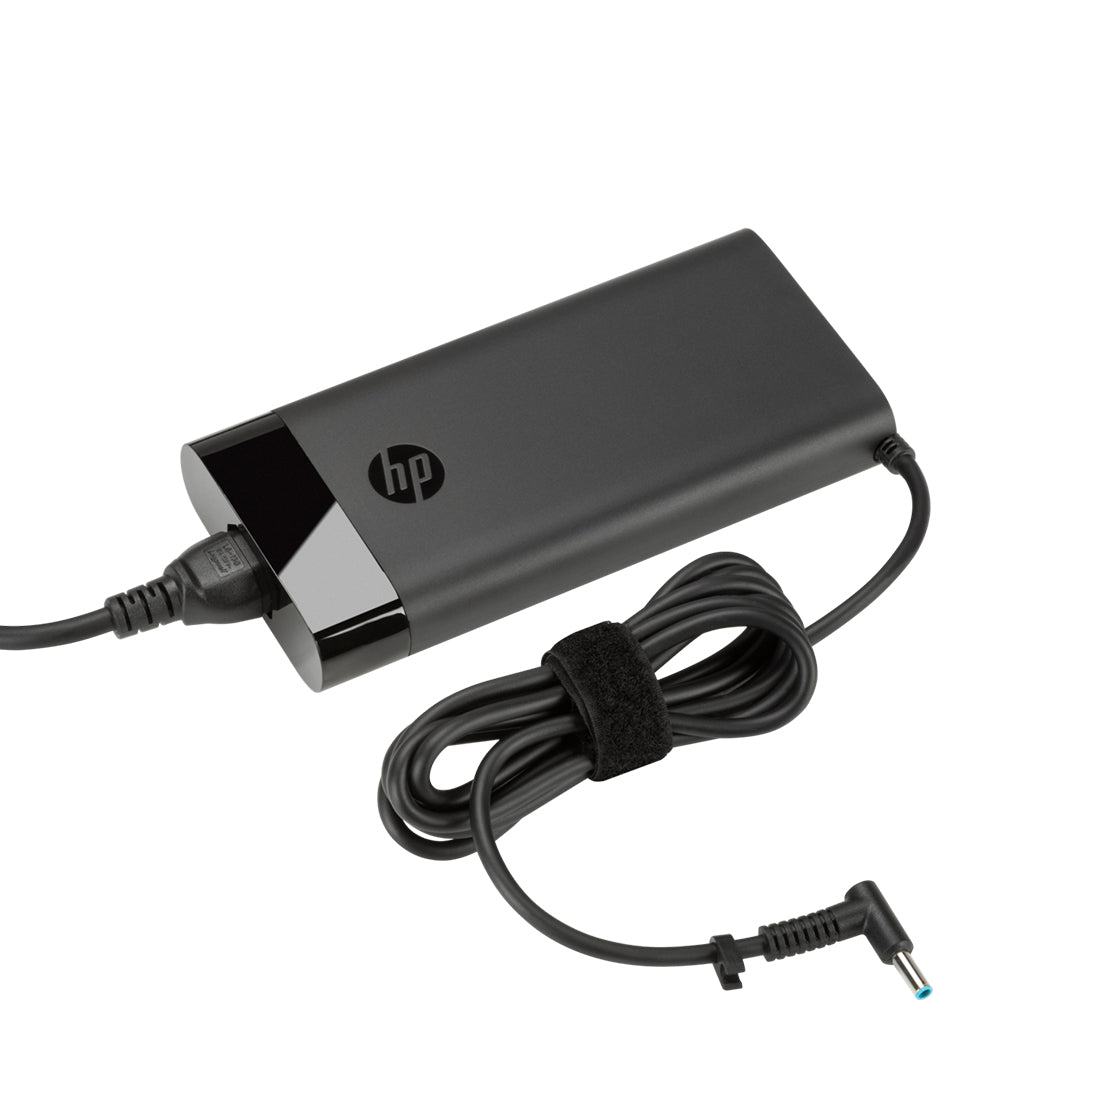 HP Original 200W 4.5mm Pin Laptop Charger Adapter (No Power Cable)